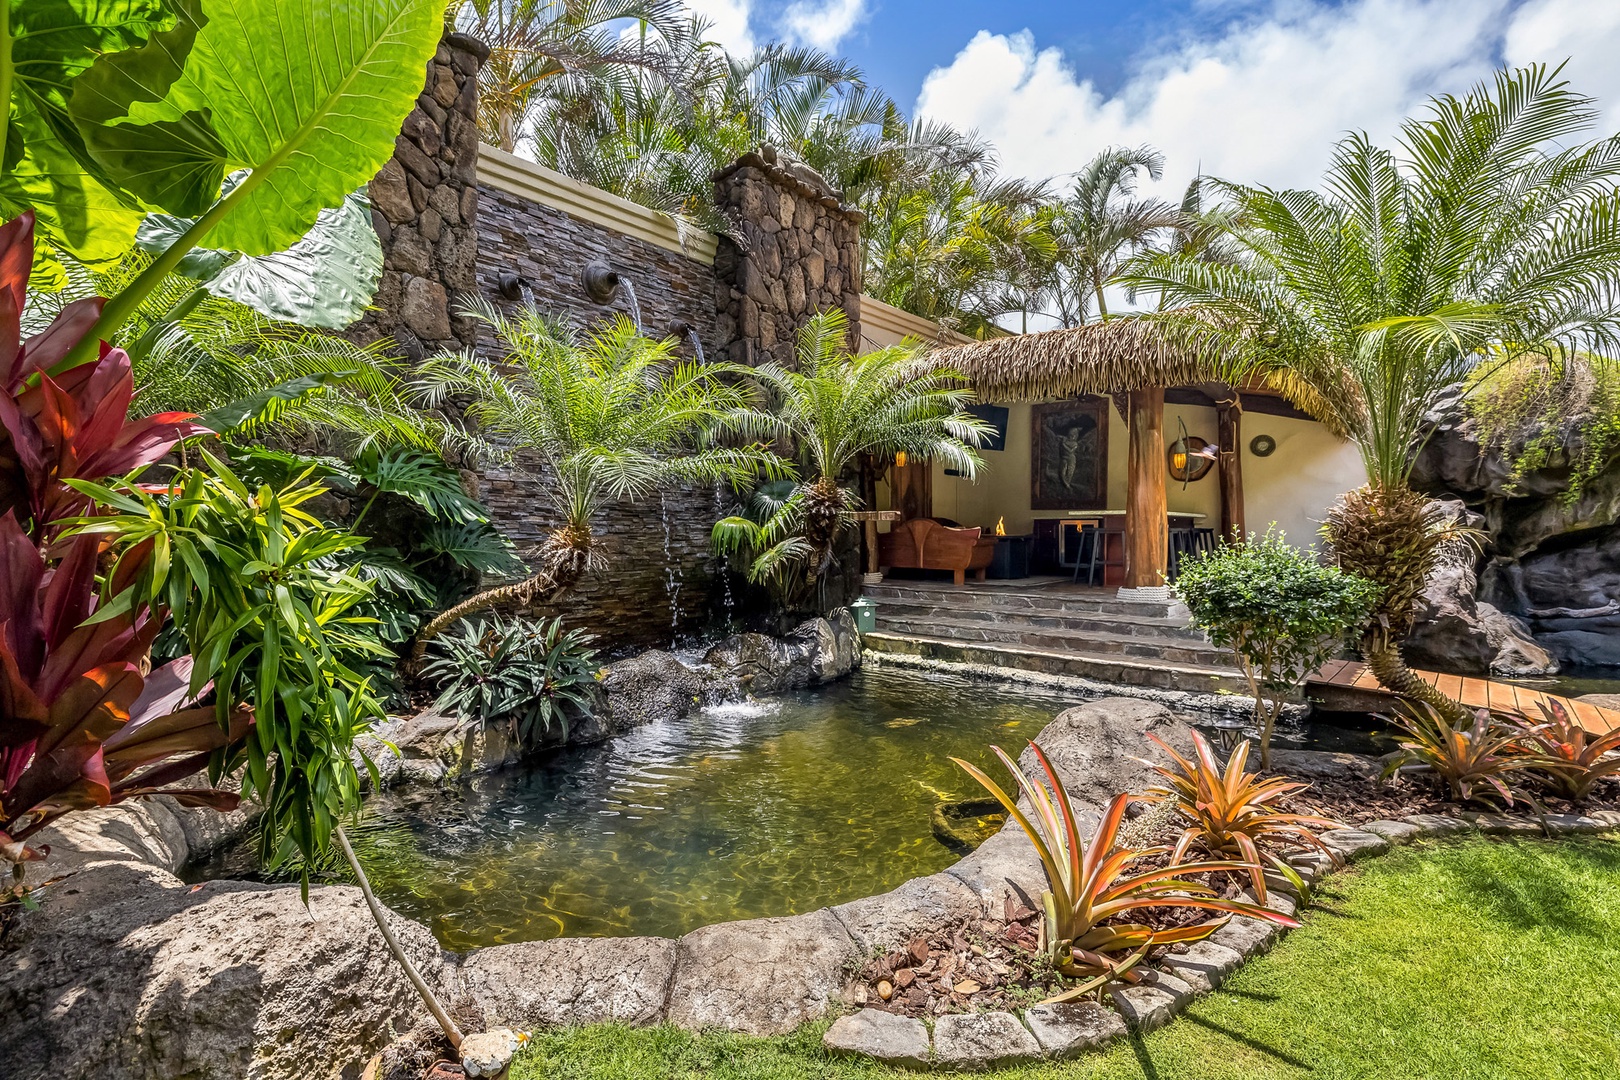 Waimanalo Vacation Rentals, Hawaii Hobbit House - Experience tranquil luxury from your backyard.